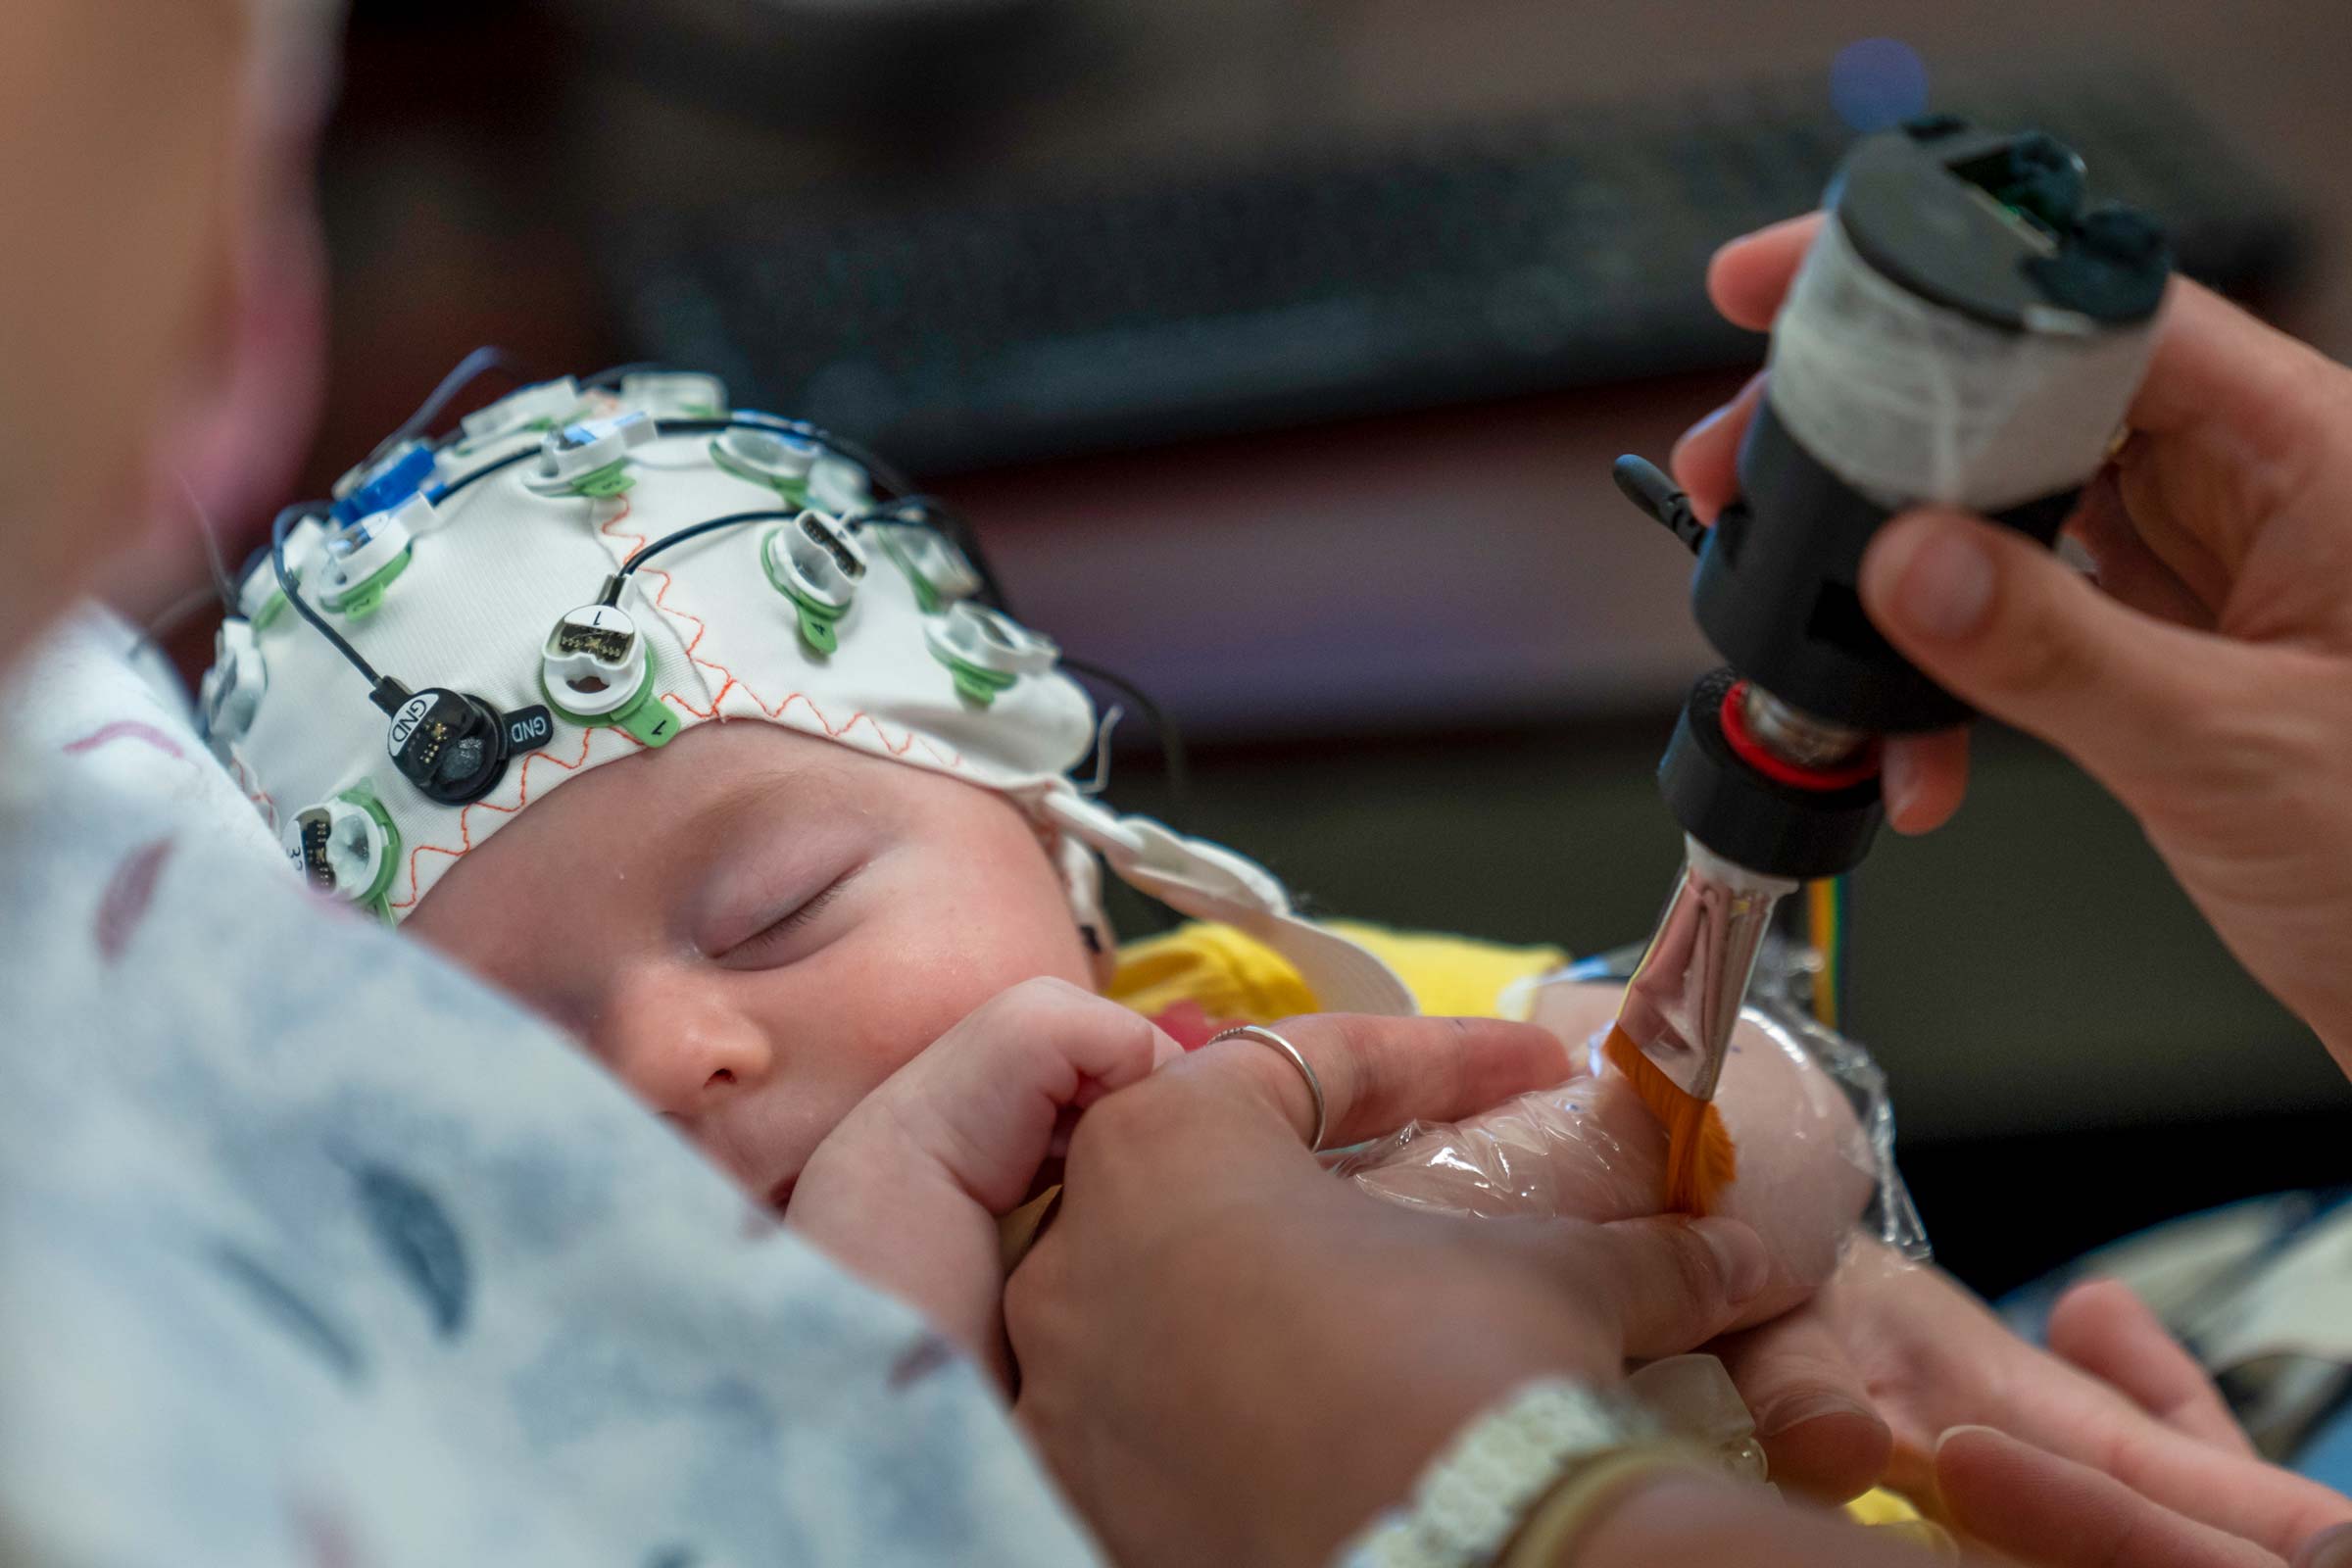 A researcher uses a paintbrush to stroke the arm of a sleeping baby, who is wearing a skullcap with lights and wires connected to it